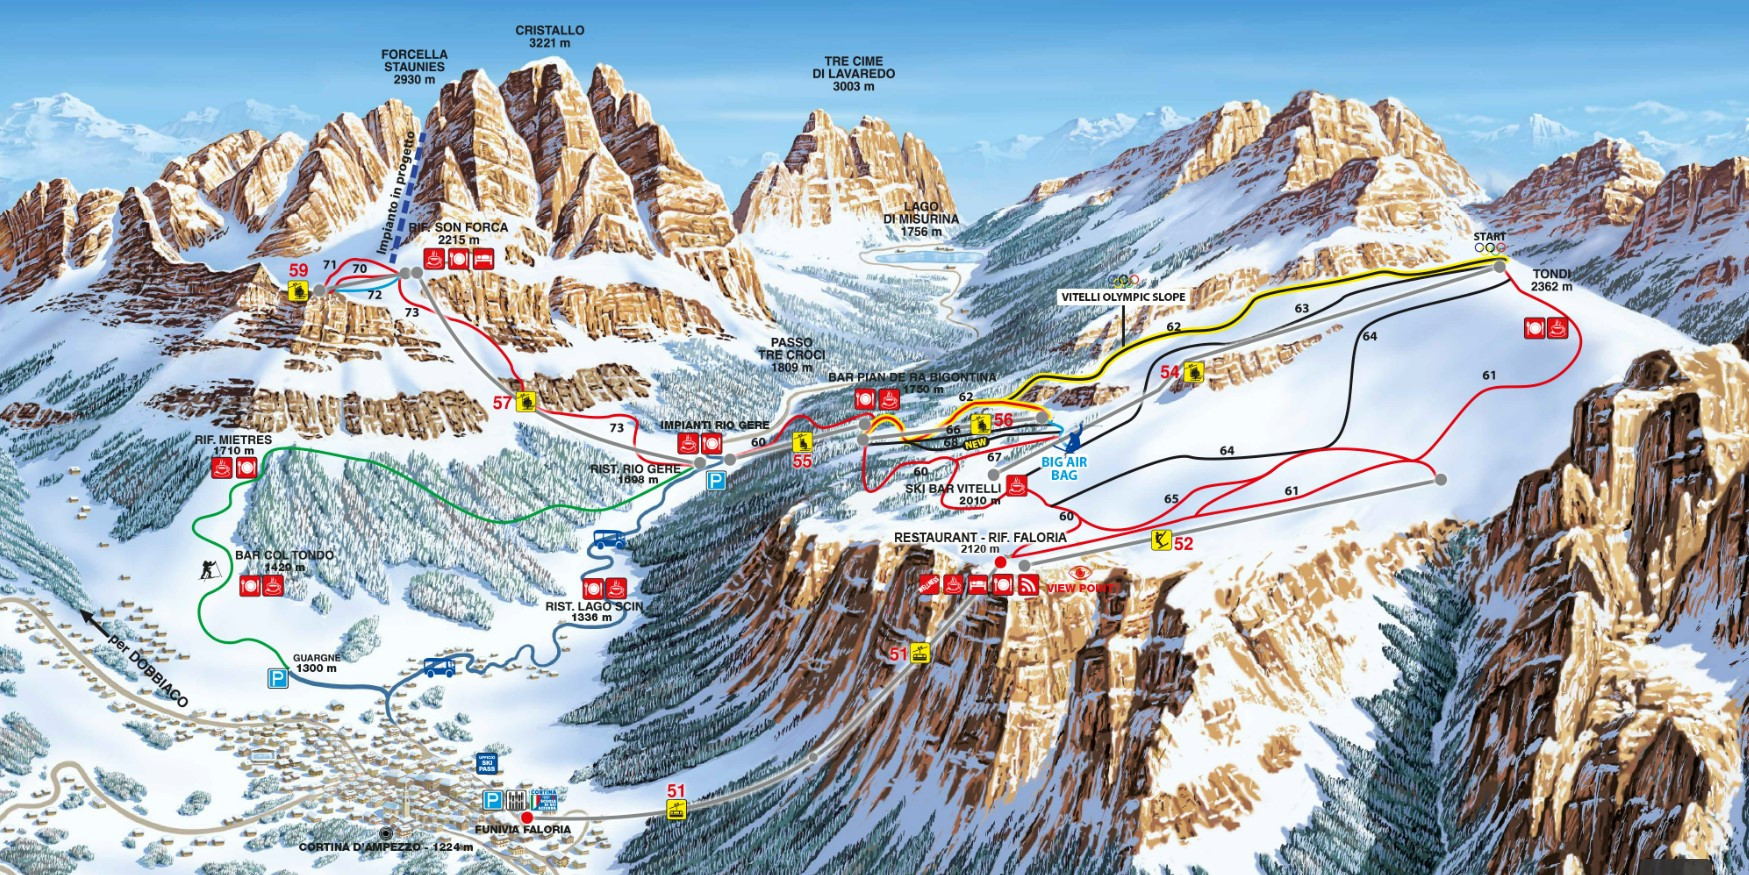 The Faloria Ski Area piste map has been updated to indicate the scheduled work to replace the Forcella Staunies ©Faloria Ski Area